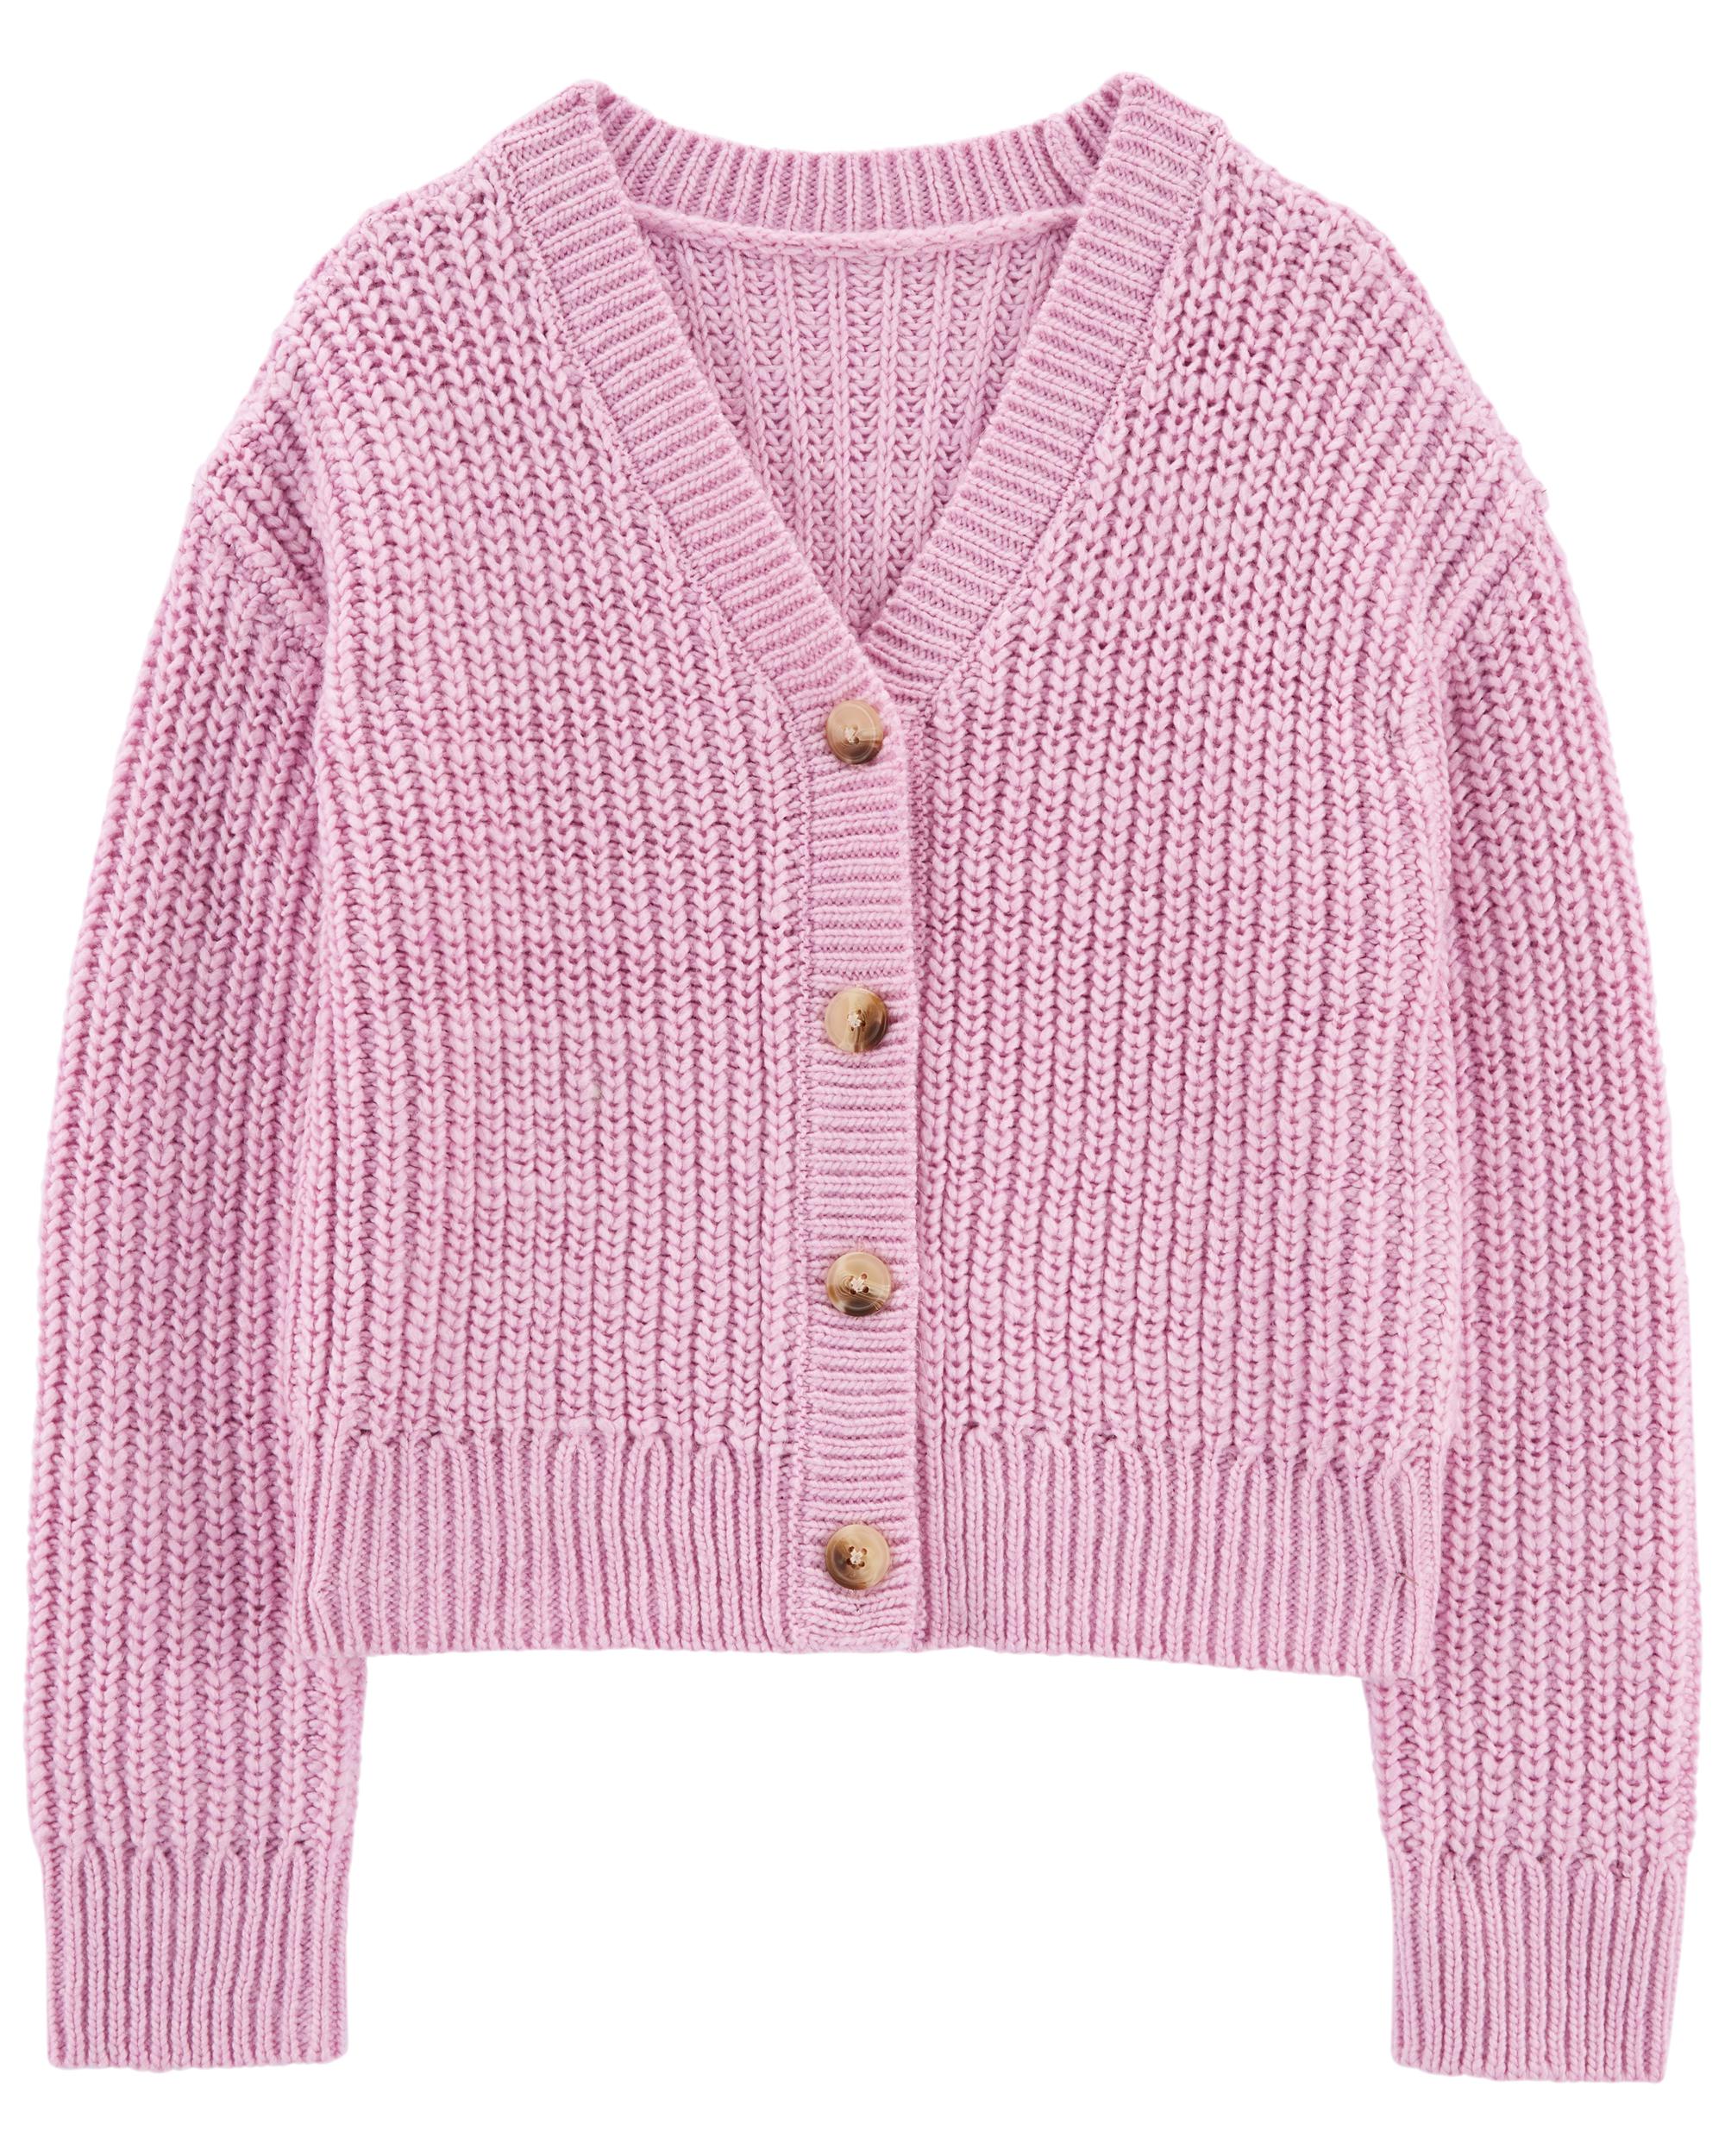 Pink Button-Front Cardigan Sweater | Carter's Oshkosh Canada